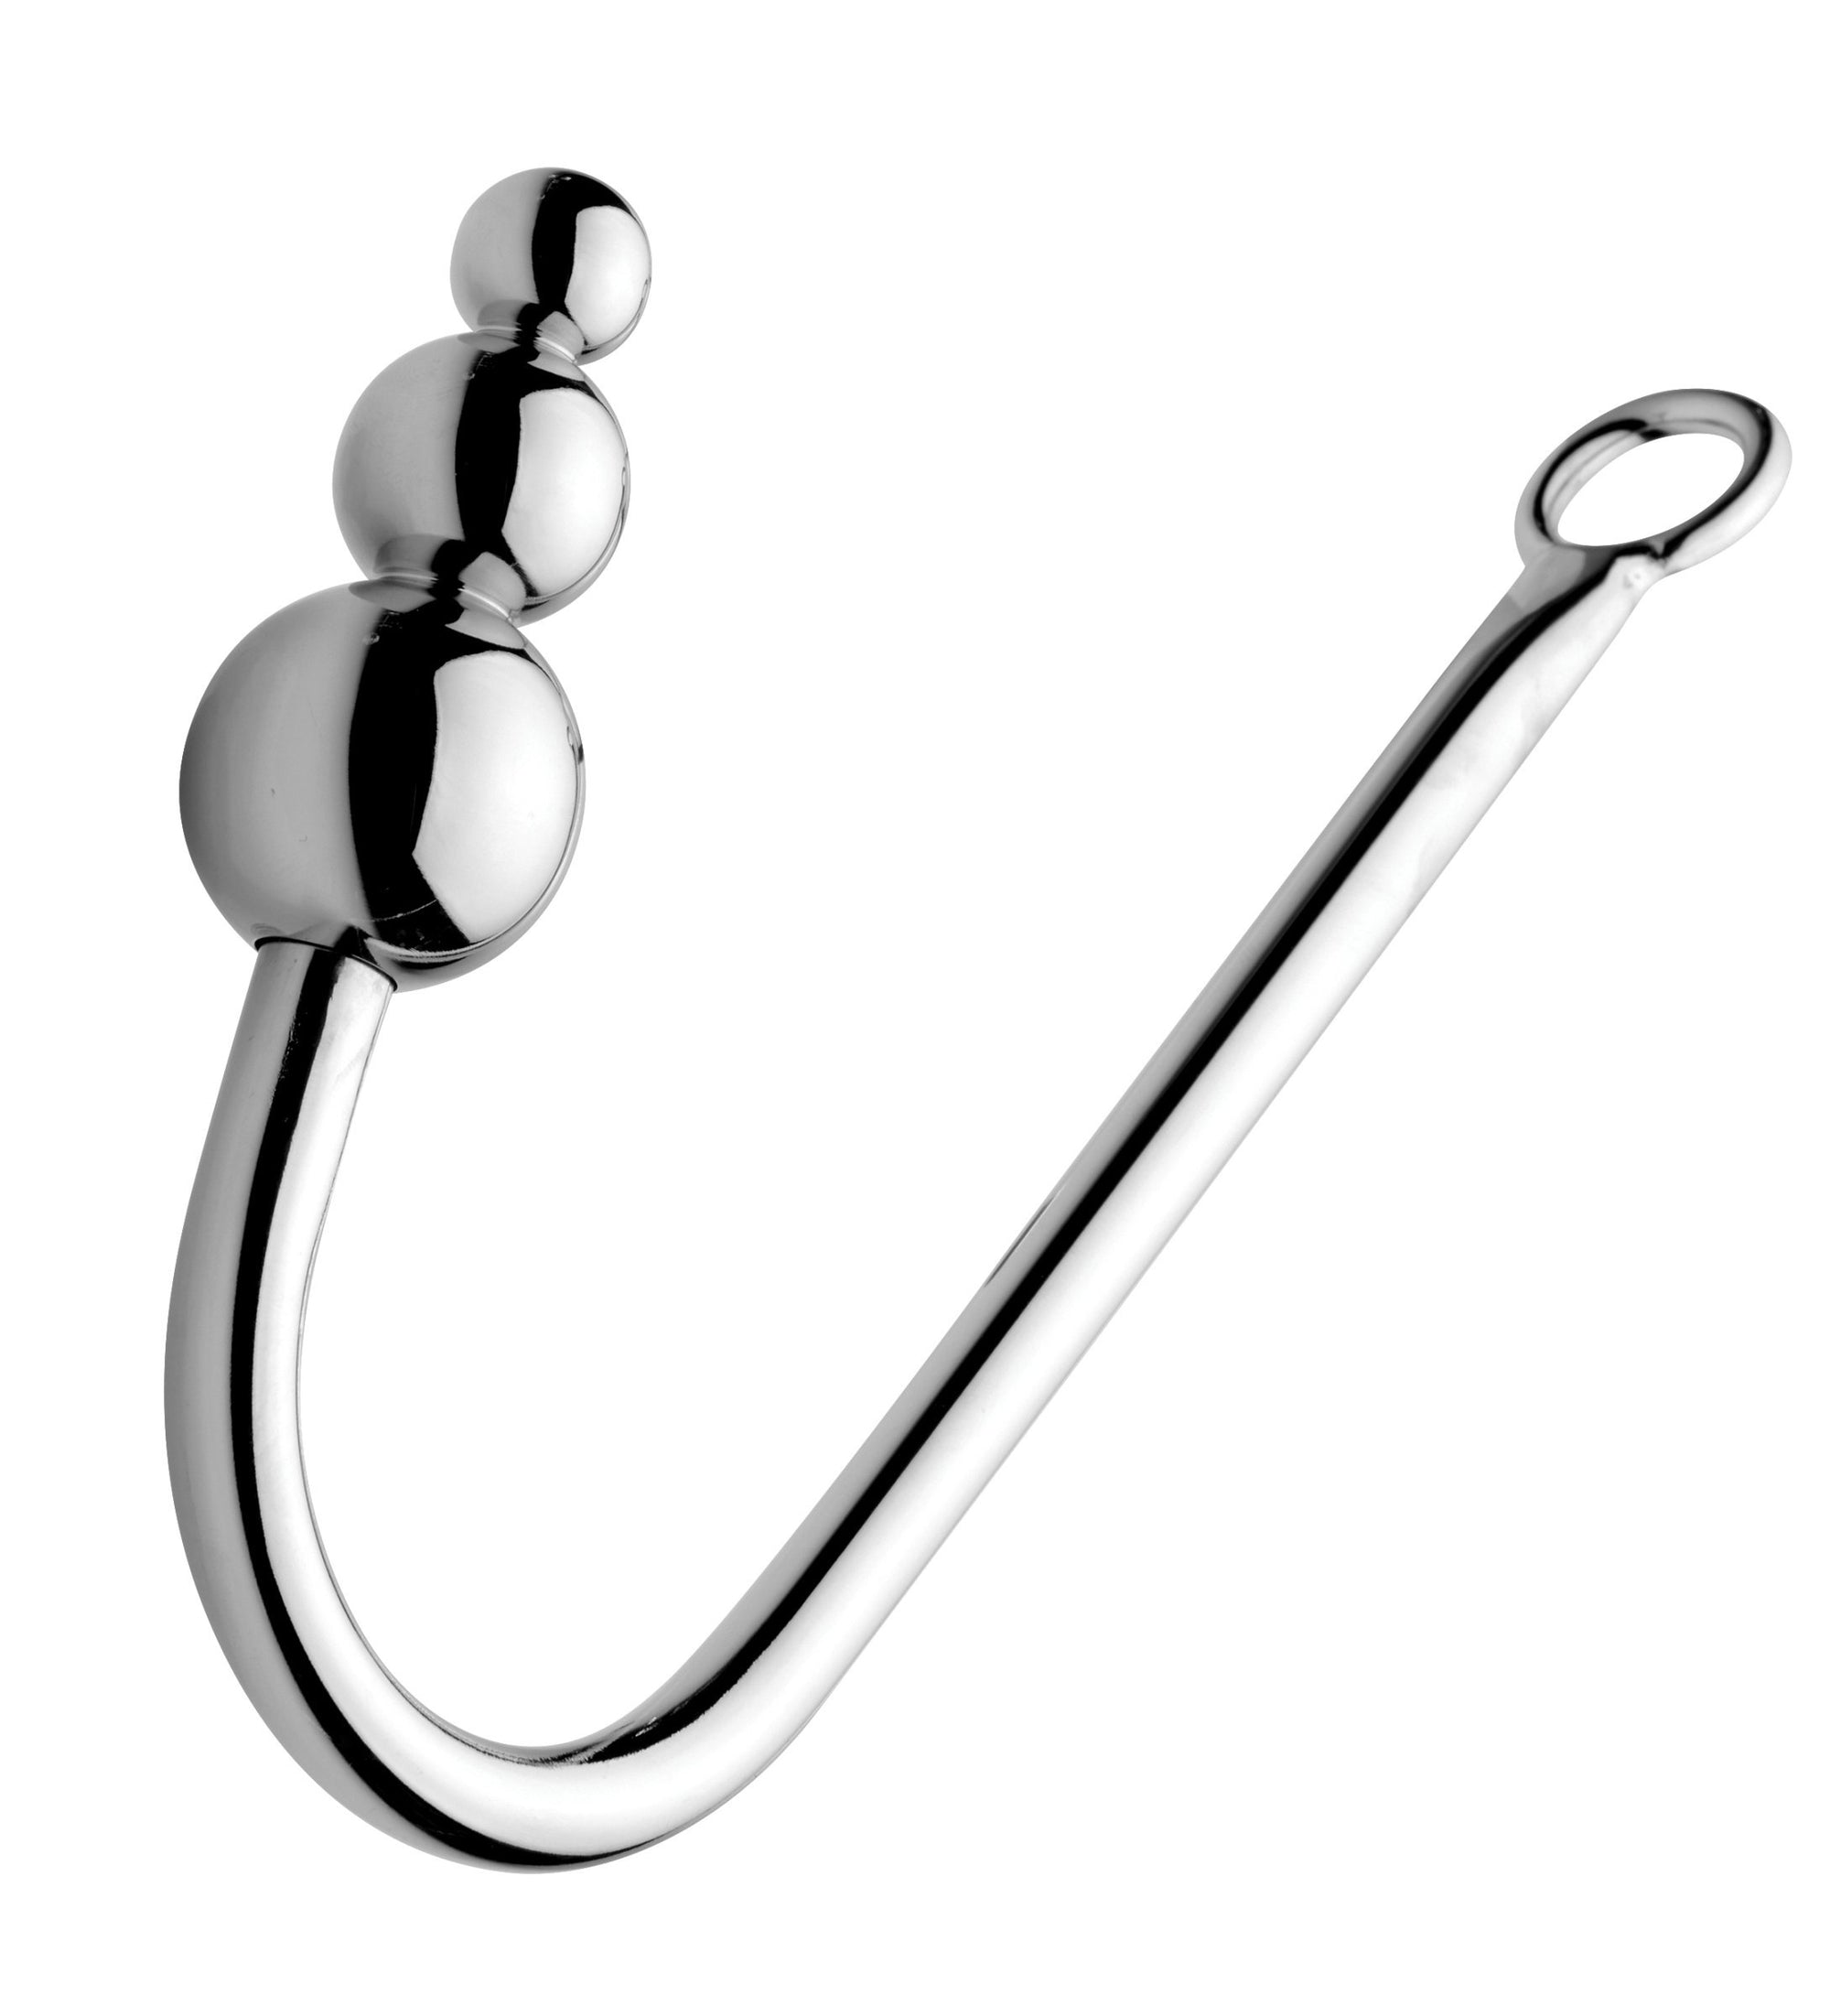 Beaded Anal Hook | Cupid’s Secret Stash
Better than your average anal hook, the Meat Hook has three stimulating balls stacked on top of each other that will massage the walls of your partners ass! Anal Toys
Master Series 


Title: Default Title


Cupid’s Secret Stash